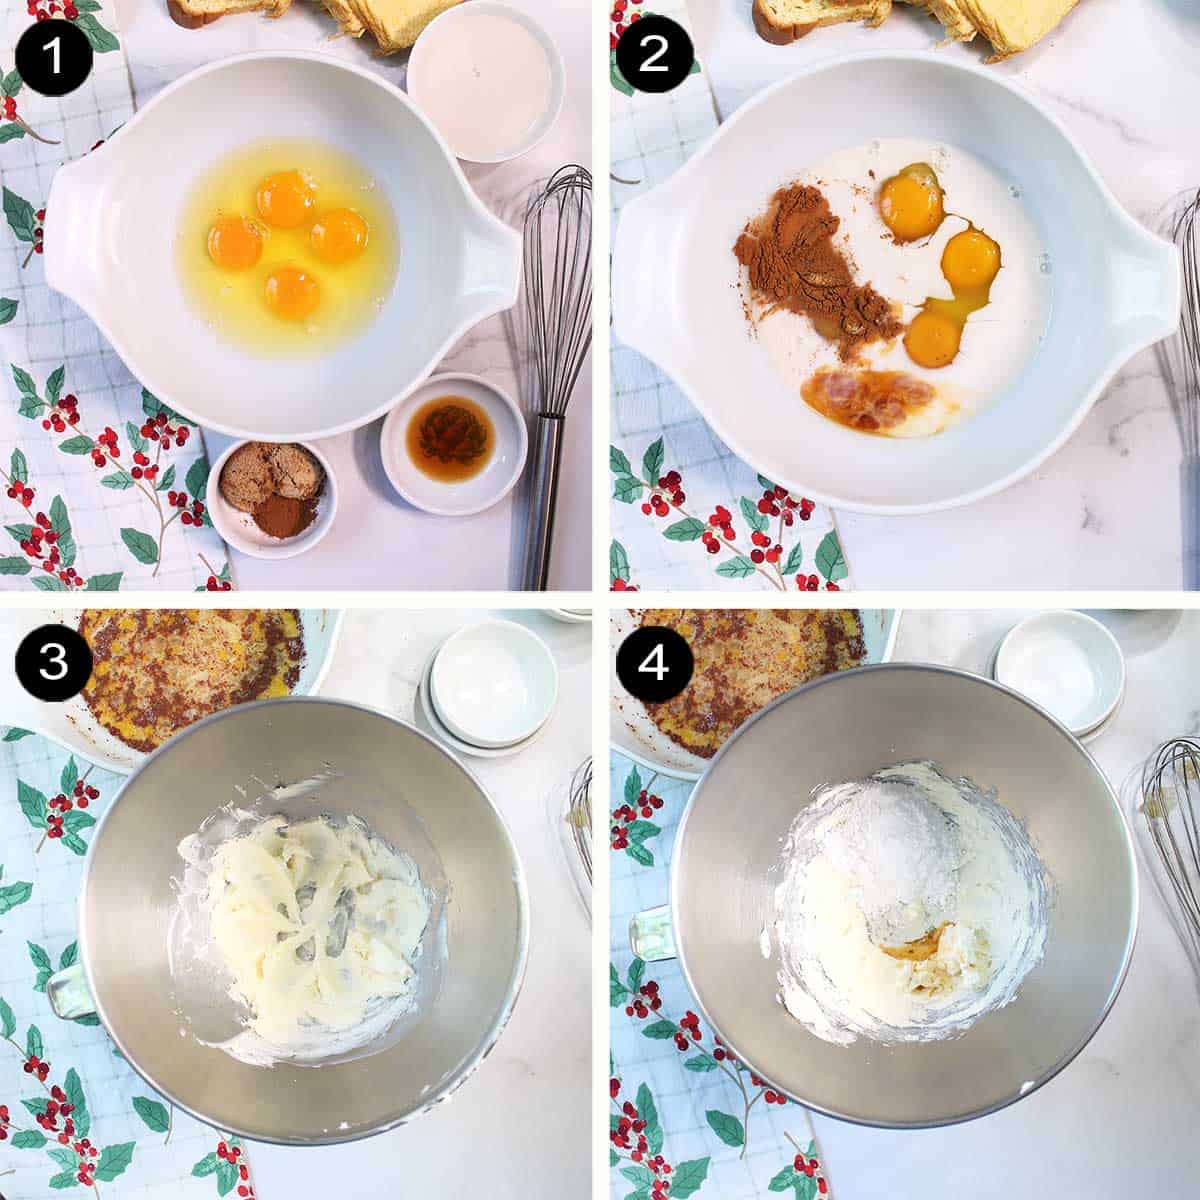 Steps to make french toast batter and filling.